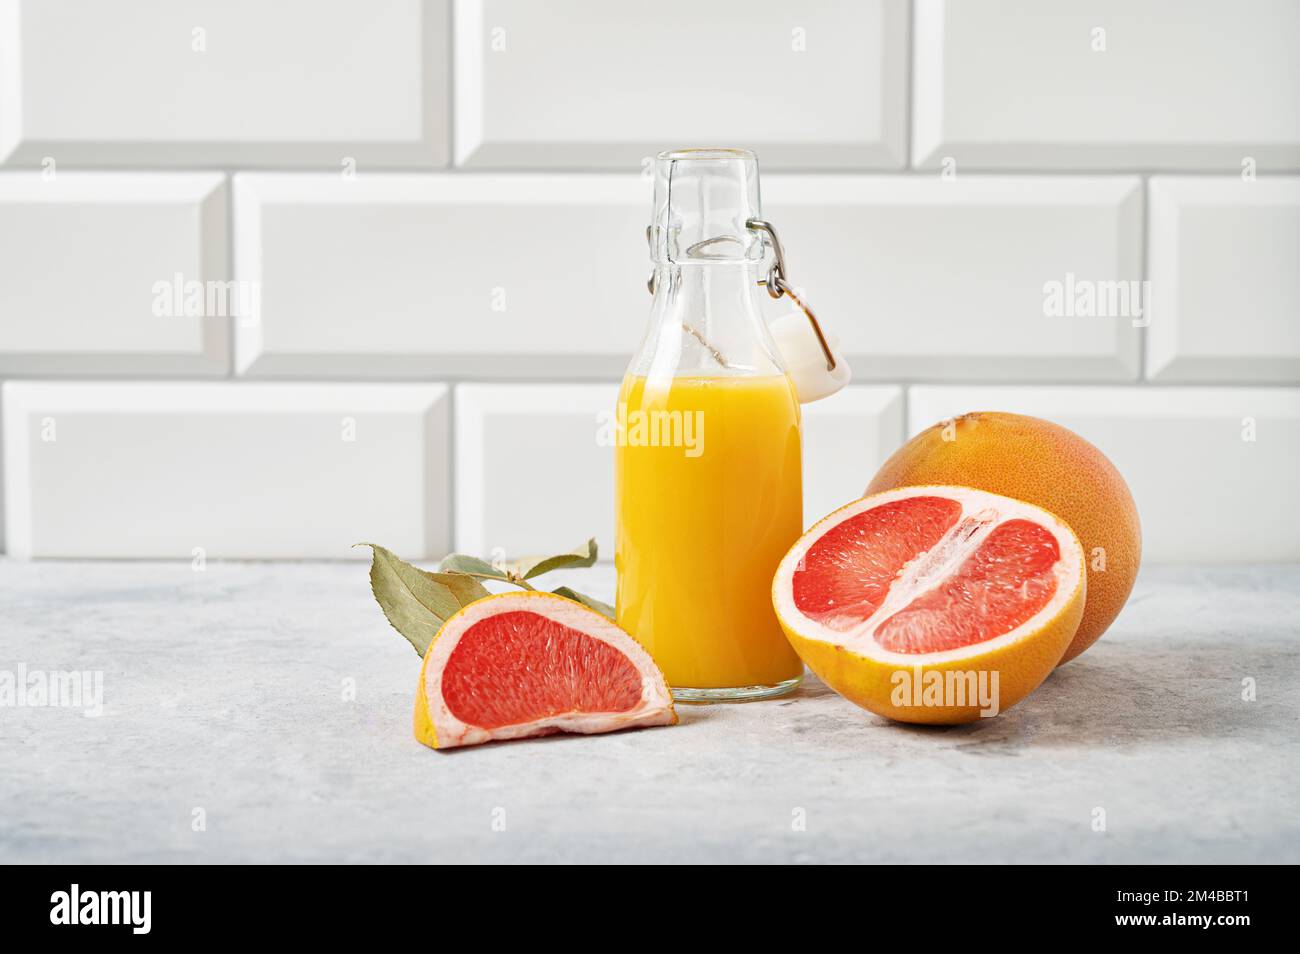 juicy grapefruit and bottle juice on a blue table on  a white brick background. Front view and copy space. Stock Photo